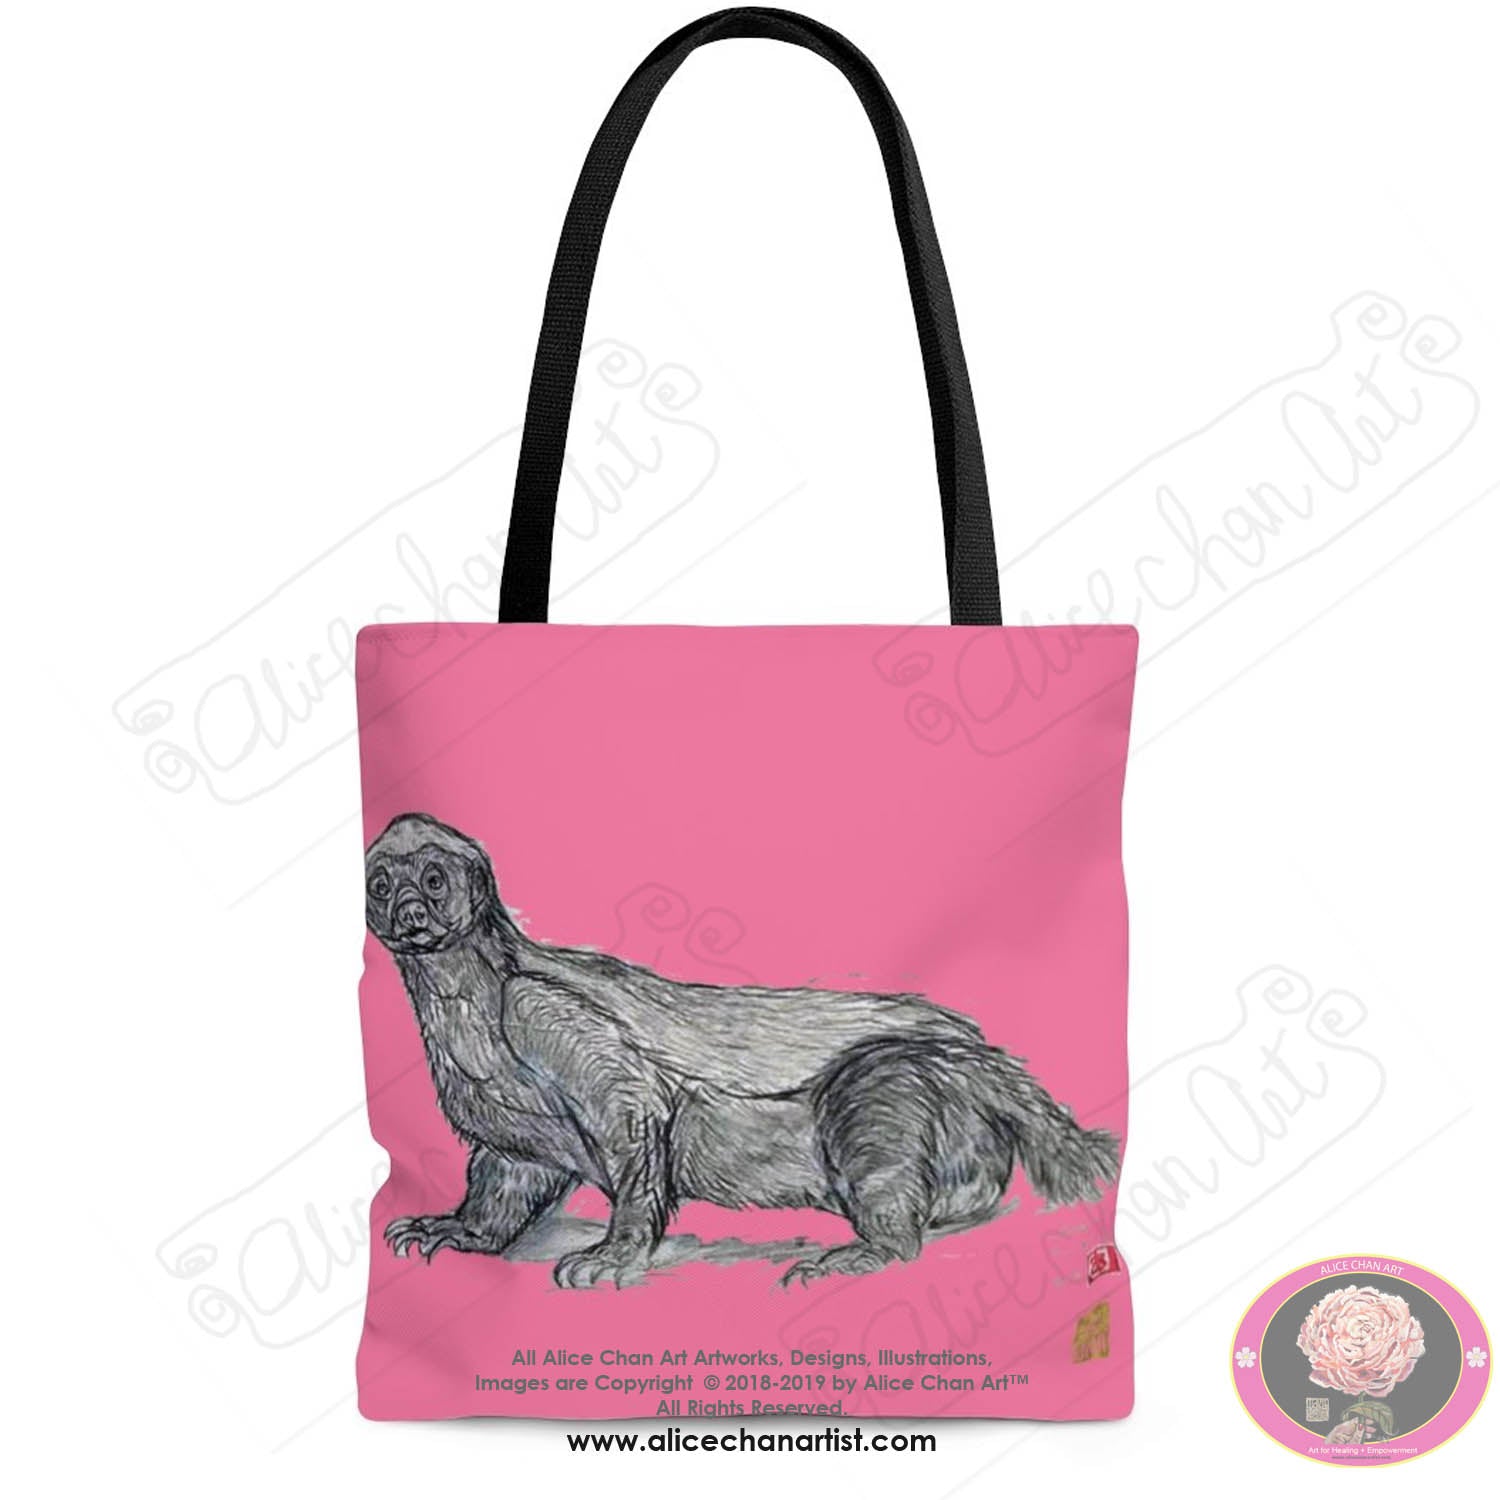 Pink Jambo, the Honey Badger, Art Square Tote Bag- Made in USA (Size: S,M,L) - alicechanart